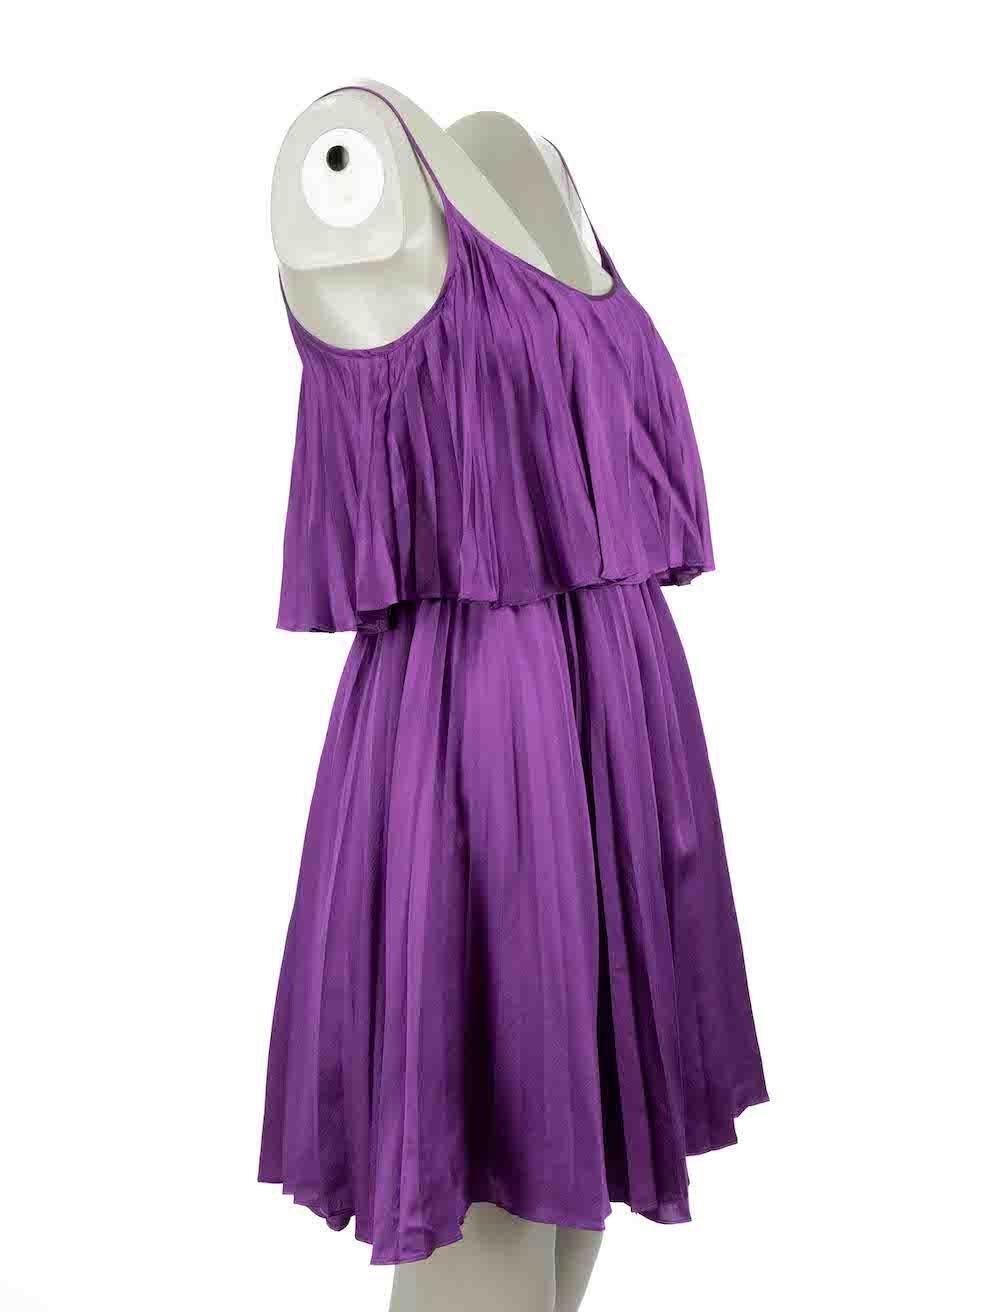 CONDITION is Very good. Minimal wear to dress is evident. Minimal wear to the rear neckline lining with small hole to the silk on this used Halston Heritage designer resale item.
 
Details
Purple
Silk
Dress
Sleeveless
Round neck
Ruffle layered